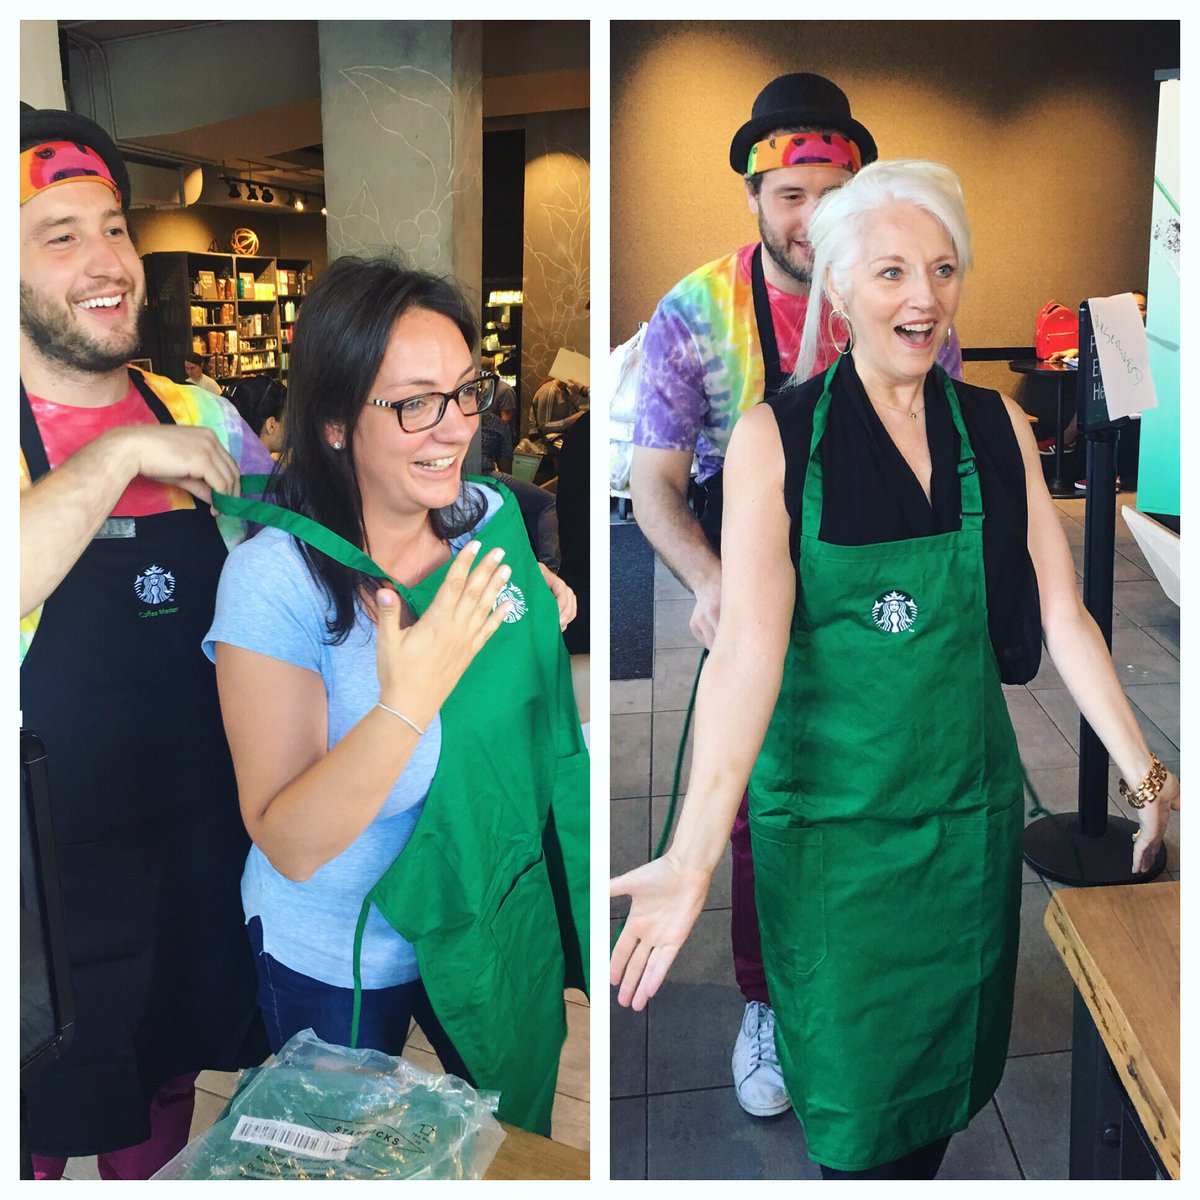 RT @BTWFoundation: Thanks @starbucksprtnrs for letting our team brew up some #CupsOfKindness today! https://t.co/ad9ZjpN8qP